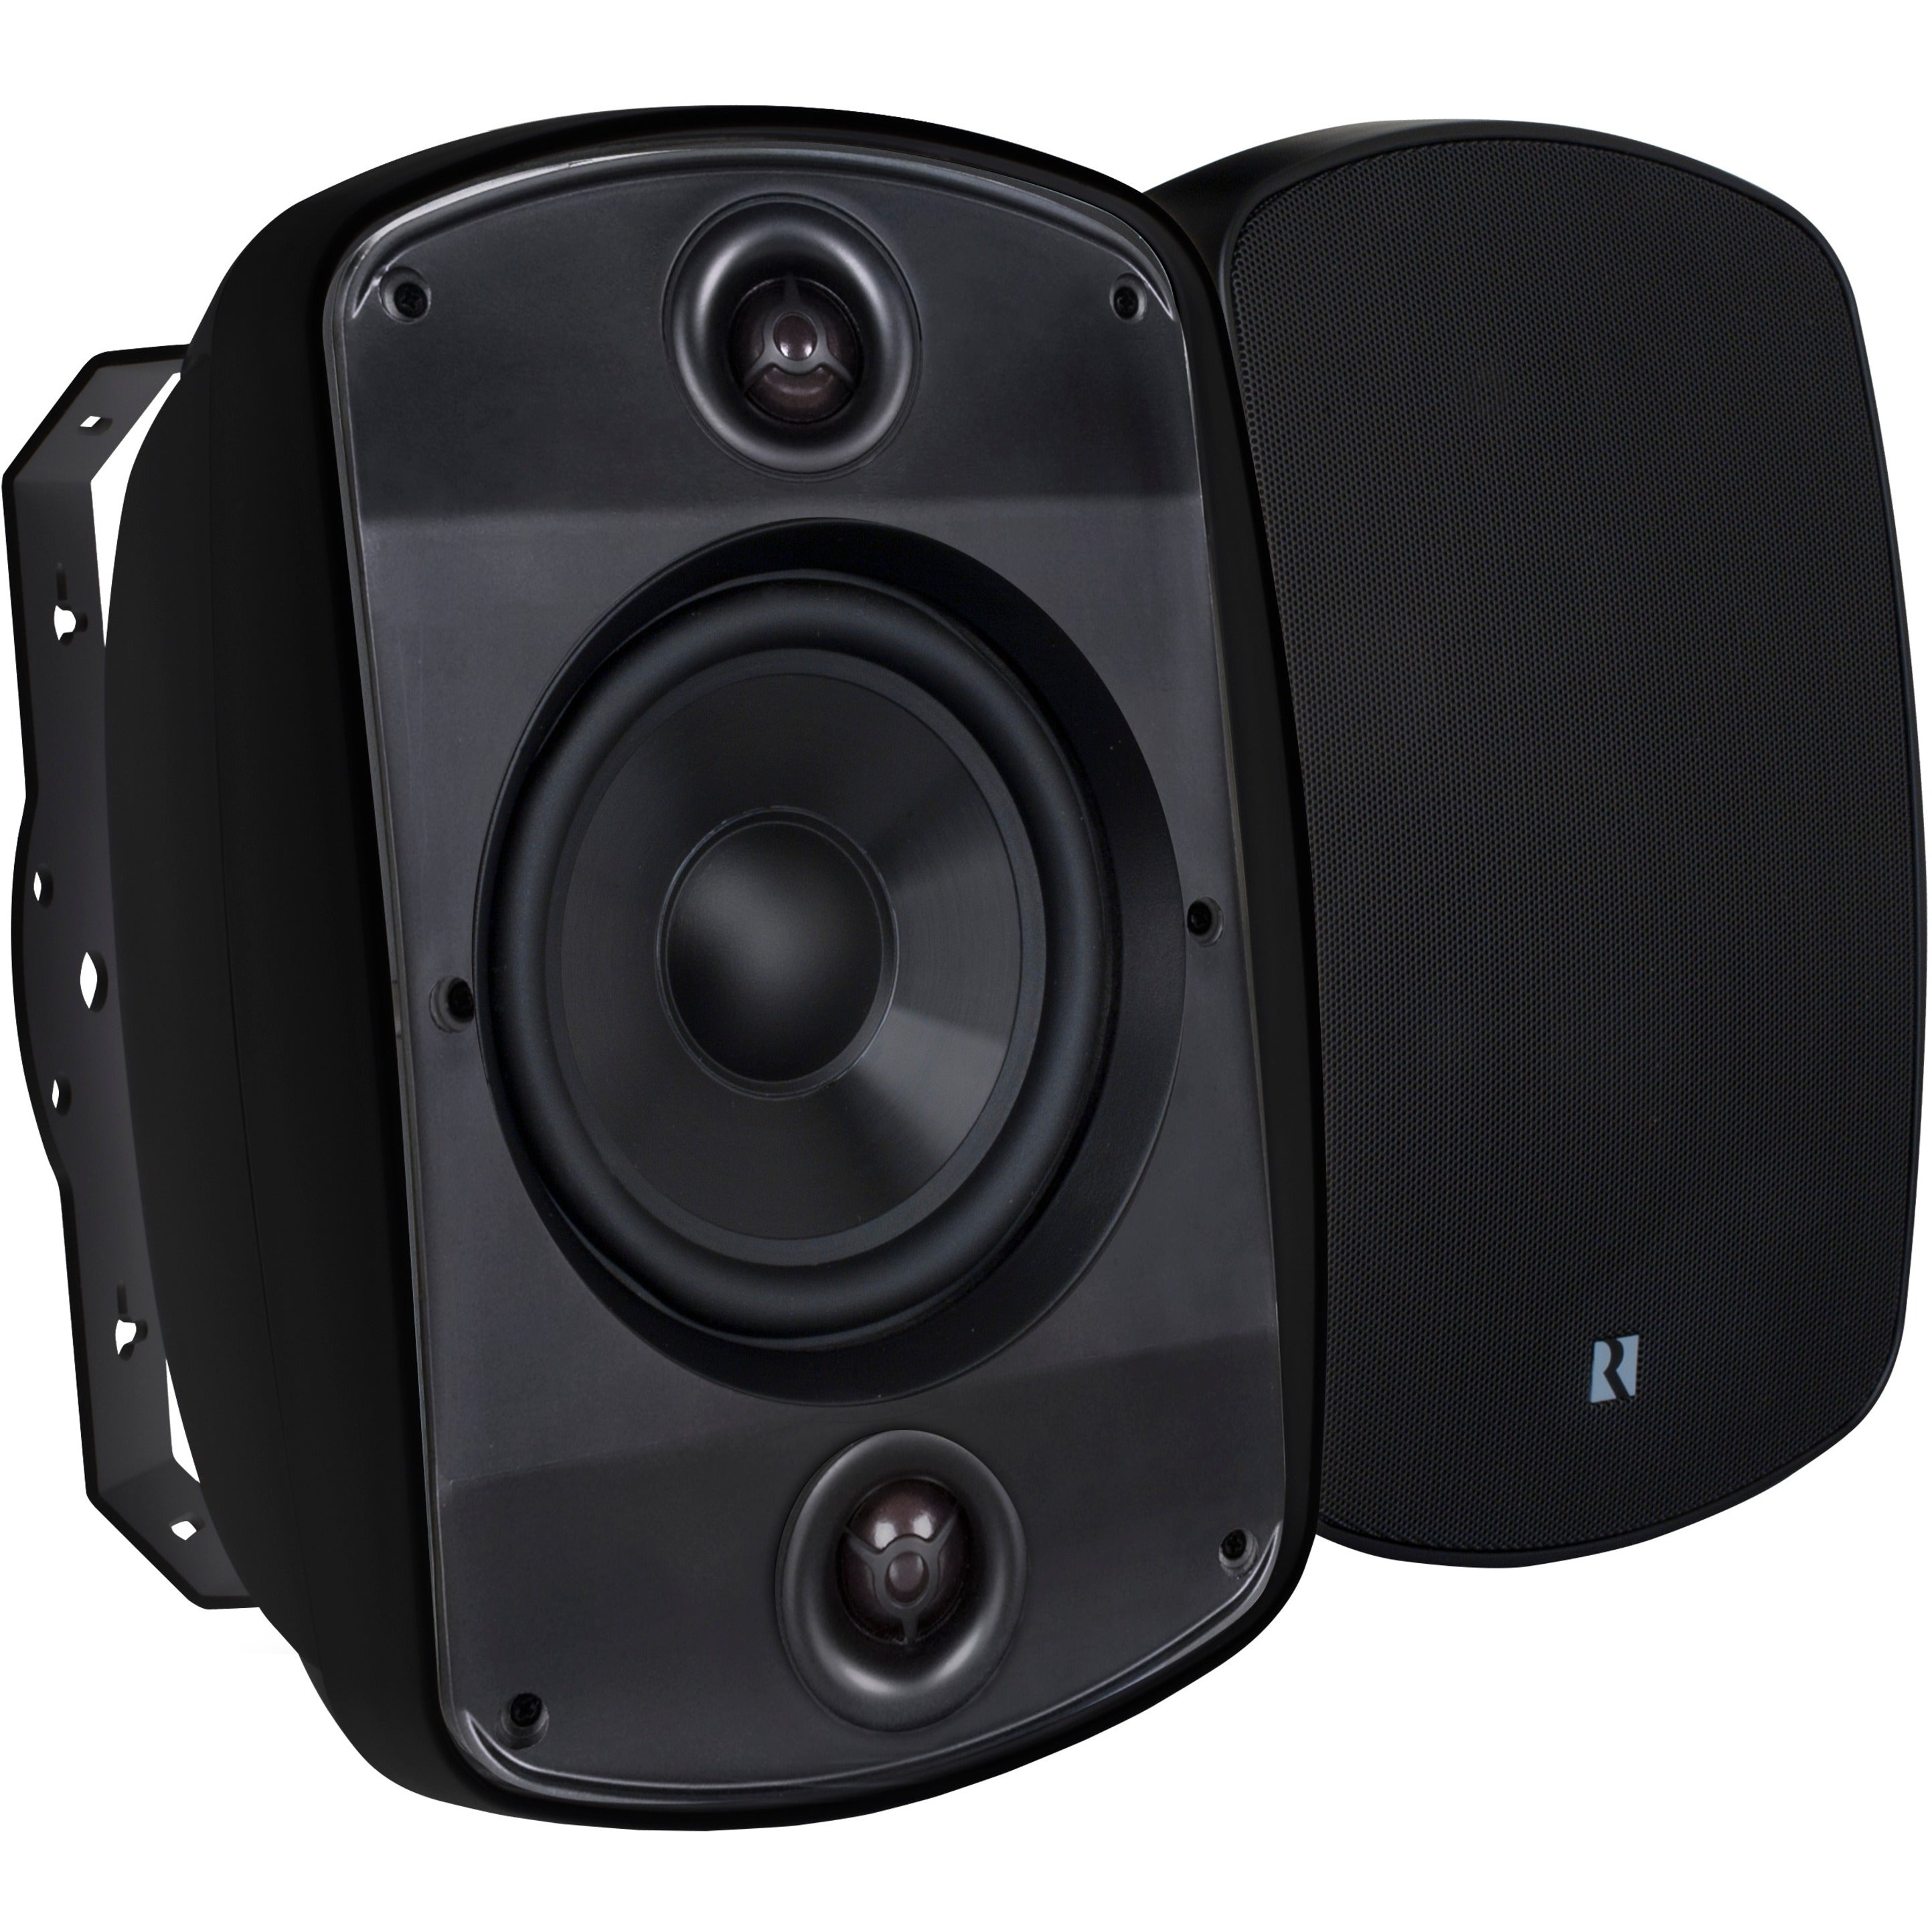 Russound 5B65SMK2-B Acclaim 6.5 OutBack Single Point Stereo Speaker in Black, Indoor/Outdoor/Bookshelf